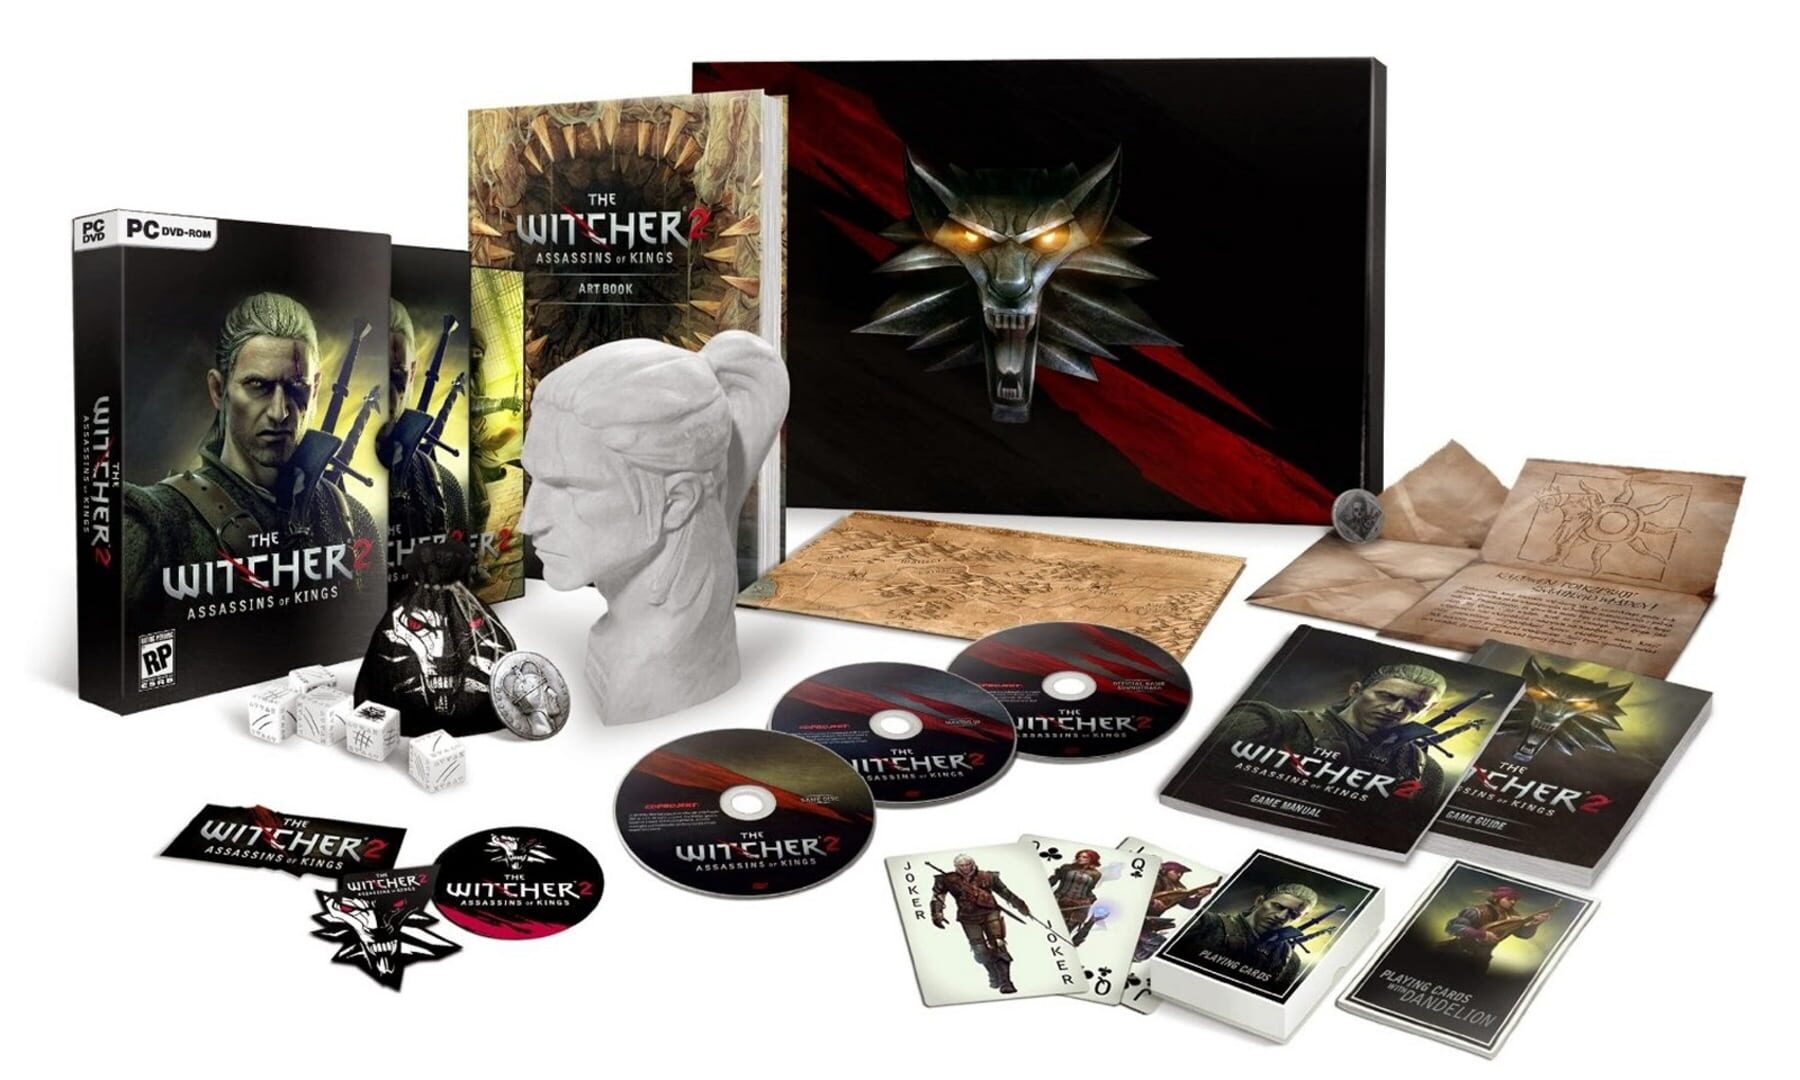 Captura de pantalla - The Witcher 2: Assassins of Kings - Collector's Edition